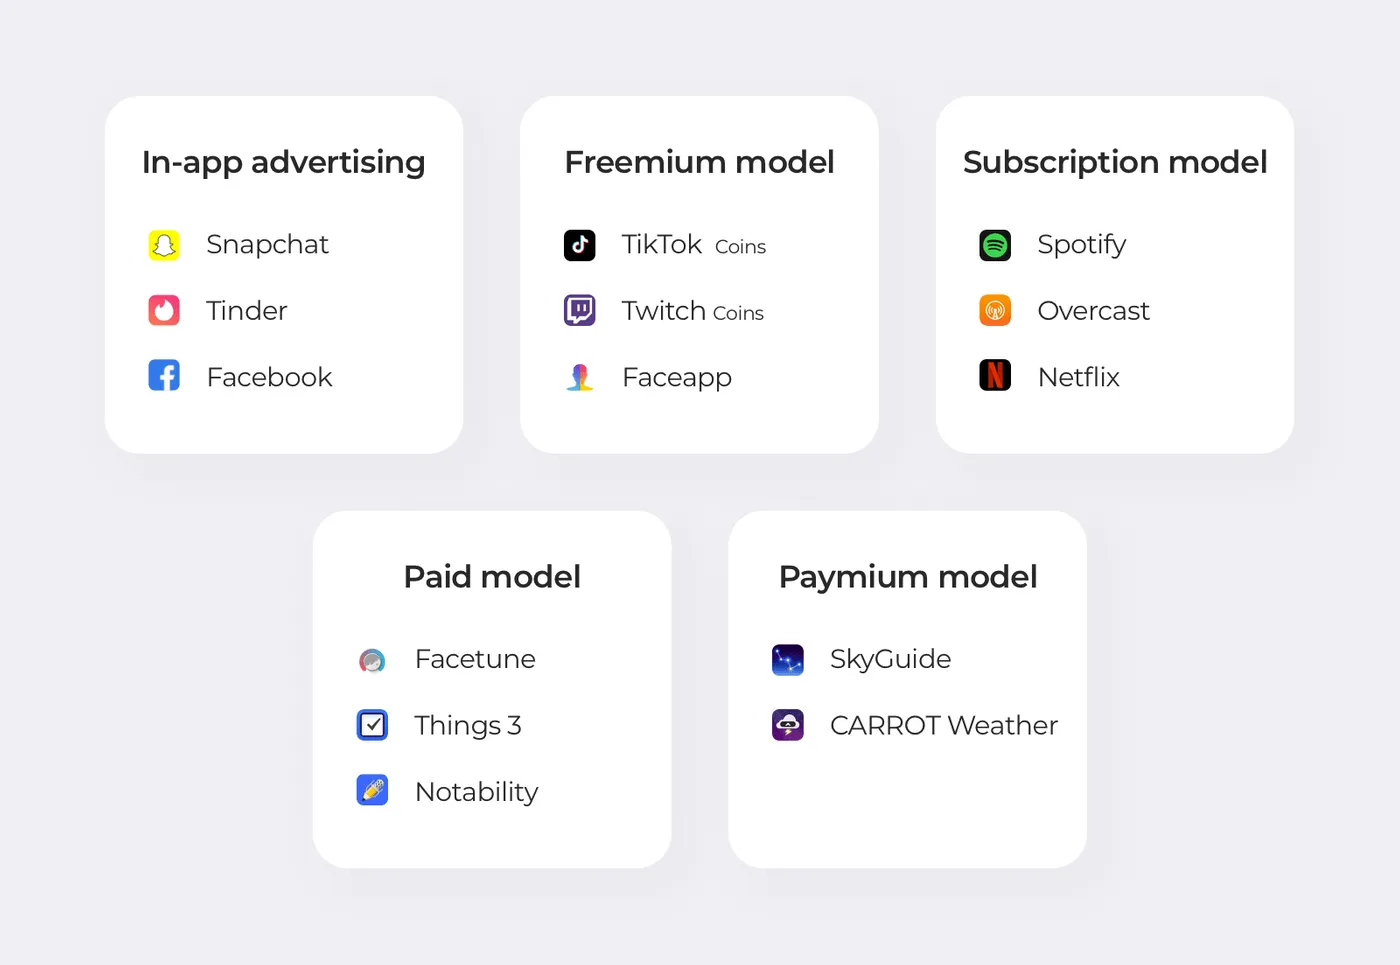 Popular apps and their monetization models